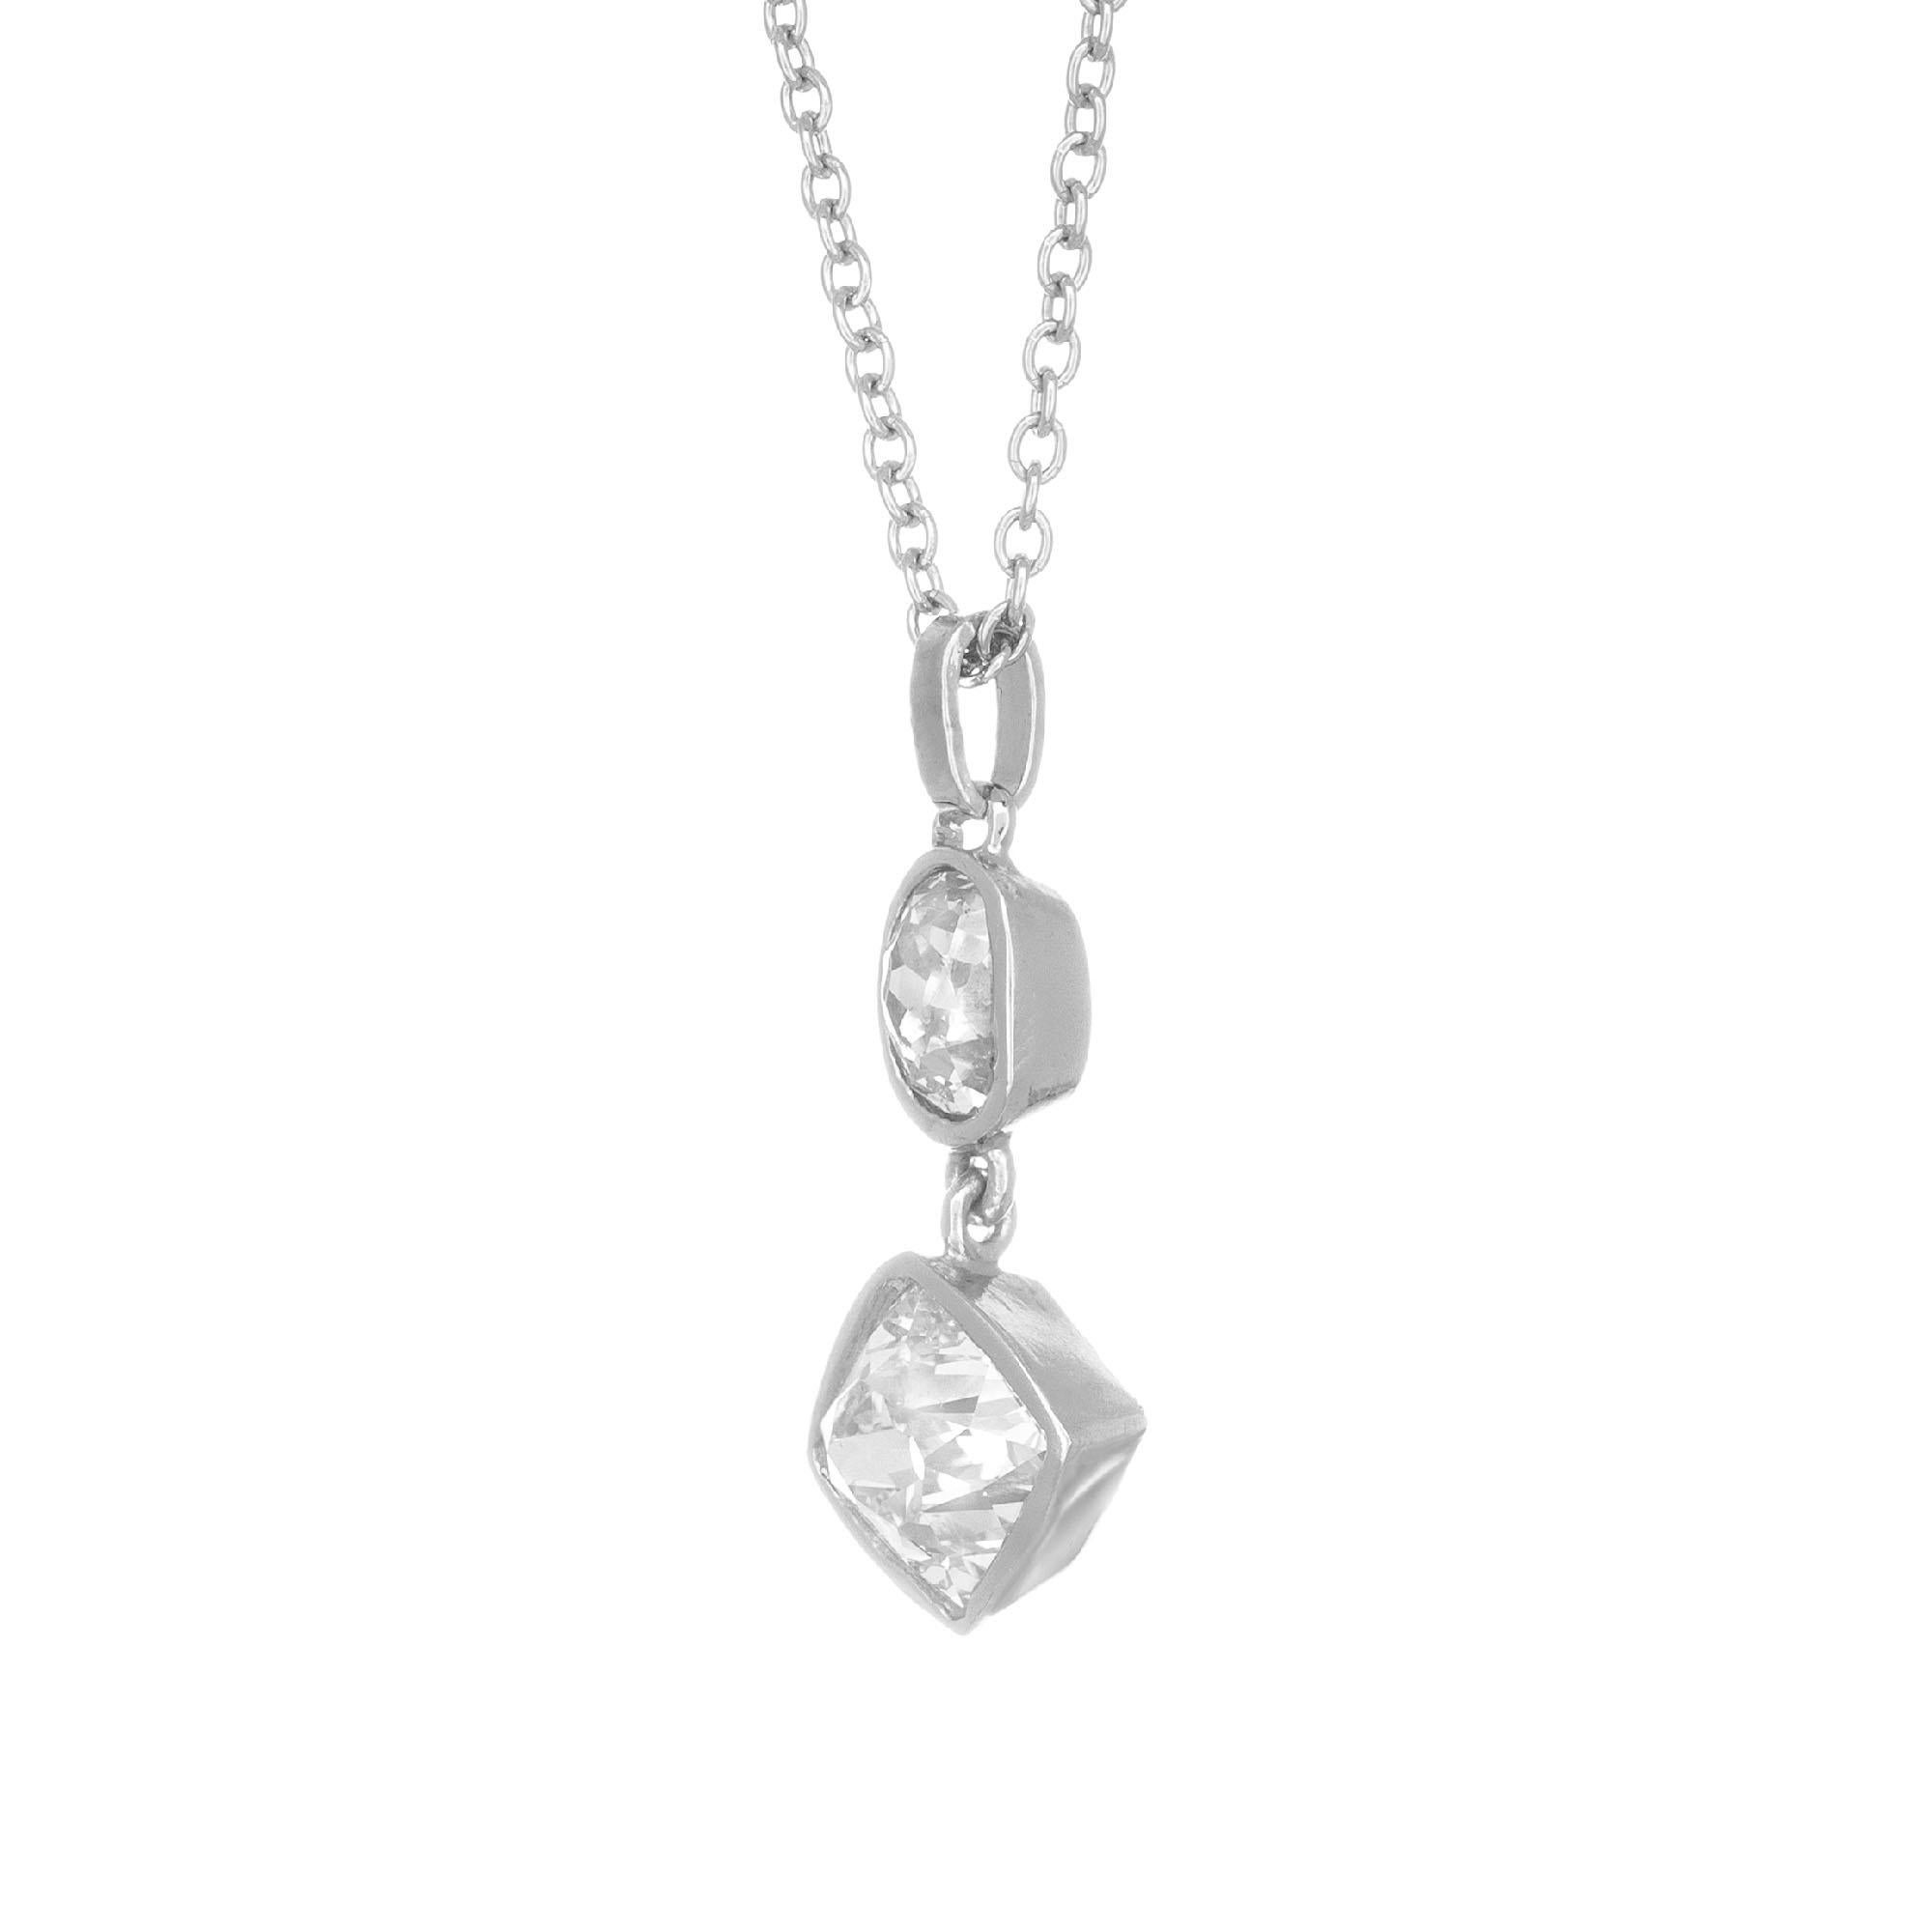 Old mine oval and square cushion cut diamonds made into a classic dangle pendant, set in platinum. Crafted in the Peter Suchy workshop.

1 cushion brilliant cut diamond G SI2, approx. .80cts GIA Certificate # 5181649369
1 oval cushion diamond I I,